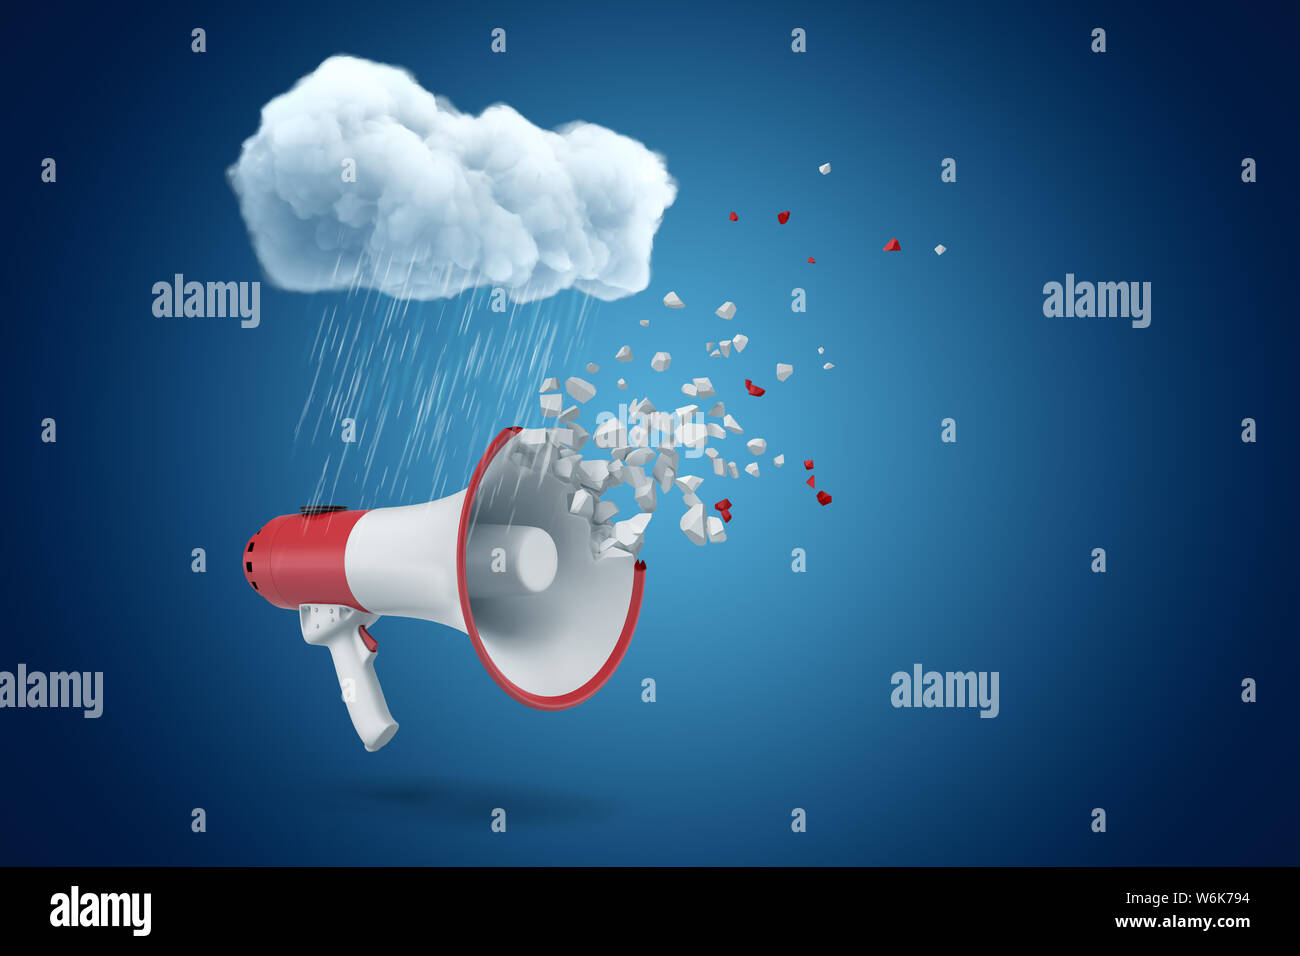 3d rendering of white cloud above red and white megaphone shattering into small pieces on blue background Stock Photo